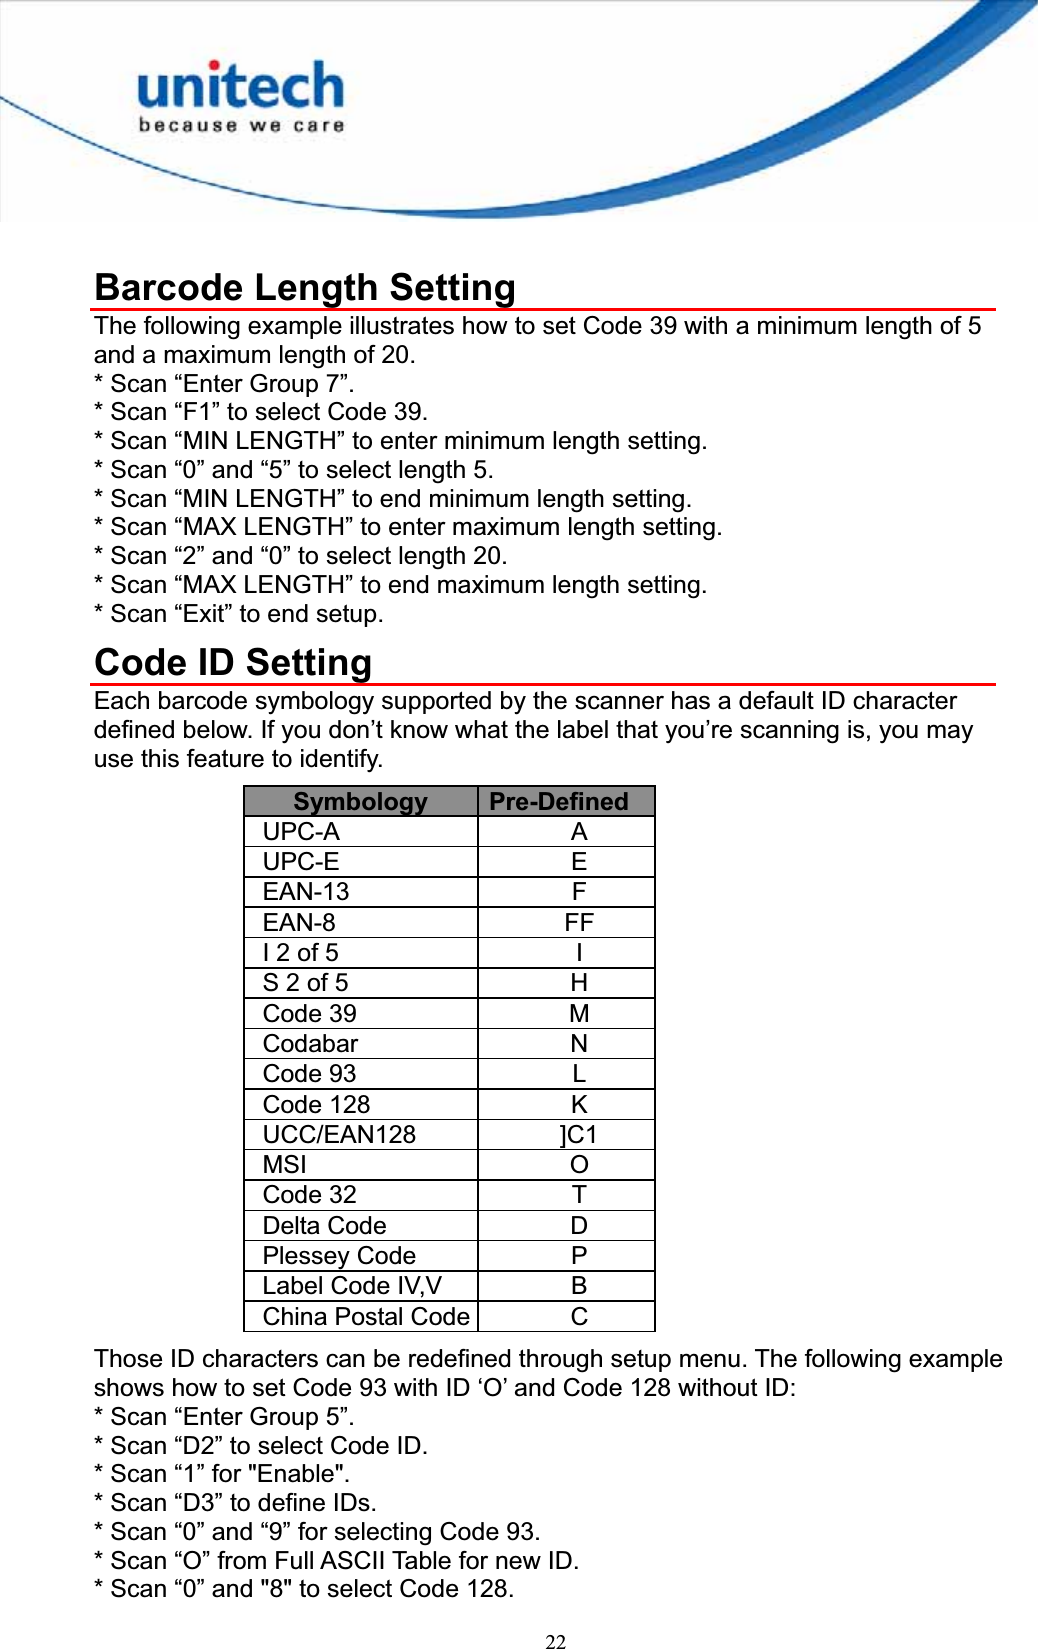 22Barcode Length Setting The following example illustrates how to set Code 39 with a minimum length of 5 and a maximum length of 20. * Scan “Enter Group 7”. * Scan “F1” to select Code 39. * Scan “MIN LENGTH” to enter minimum length setting. * Scan “0” and “5” to select length 5. * Scan “MIN LENGTH” to end minimum length setting. * Scan “MAX LENGTH” to enter maximum length setting. * Scan “2” and “0” to select length 20. * Scan “MAX LENGTH” to end maximum length setting. * Scan “Exit” to end setup. Code ID Setting Each barcode symbology supported by the scanner has a default ID character defined below. If you don’t know what the label that you’re scanning is, you may use this feature to identify. Symbology  Pre-DefinedUPC-A A UPC-E E EAN-13 F EAN-8 FF I 2 of 5  IS 2 of 5  HCode 39  MCodabar N Code 93  LCode 128  KUCC/EAN128 ]C1 MSI O Code 32  TDelta Code  DPlessey Code  PLabel Code IV,V  B China Postal Code  C Those ID characters can be redefined through setup menu. The following example shows how to set Code 93 with ID ‘O’ and Code 128 without ID: * Scan “Enter Group 5”. * Scan “D2” to select Code ID. * Scan “1” for &quot;Enable&quot;. * Scan “D3” to define IDs. * Scan “0” and “9” for selecting Code 93. * Scan “O” from Full ASCII Table for new ID. * Scan “0” and &quot;8&quot; to select Code 128. 